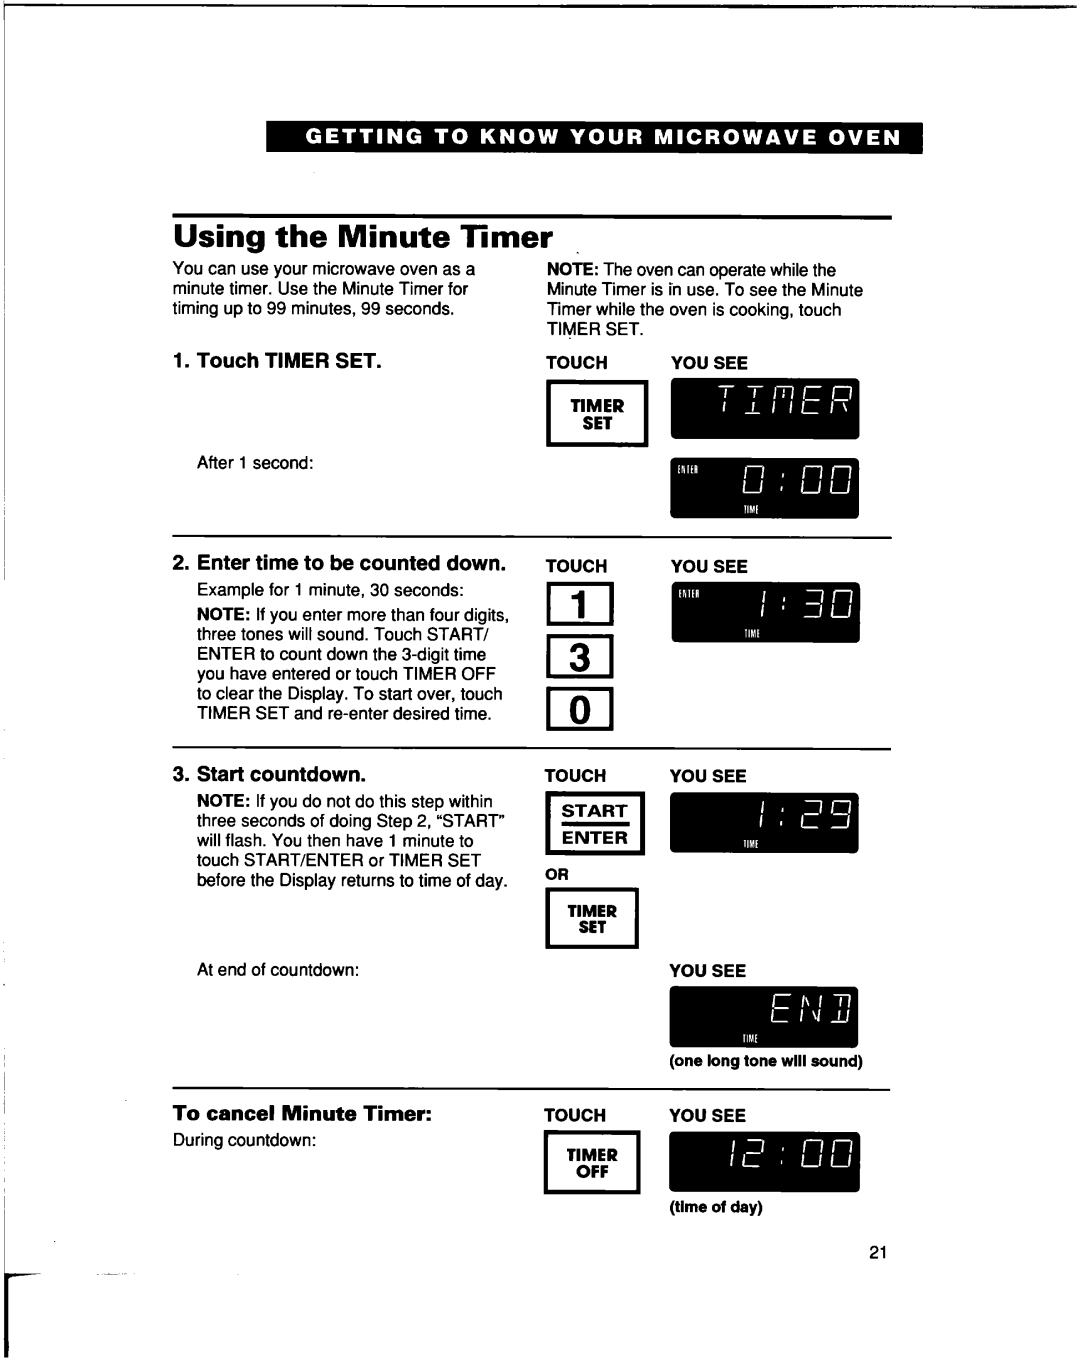 Whirlpool lREB/Q warranty Using, Touch, Enter time to be counted down, Start countdown, To cancel Minute Timer 